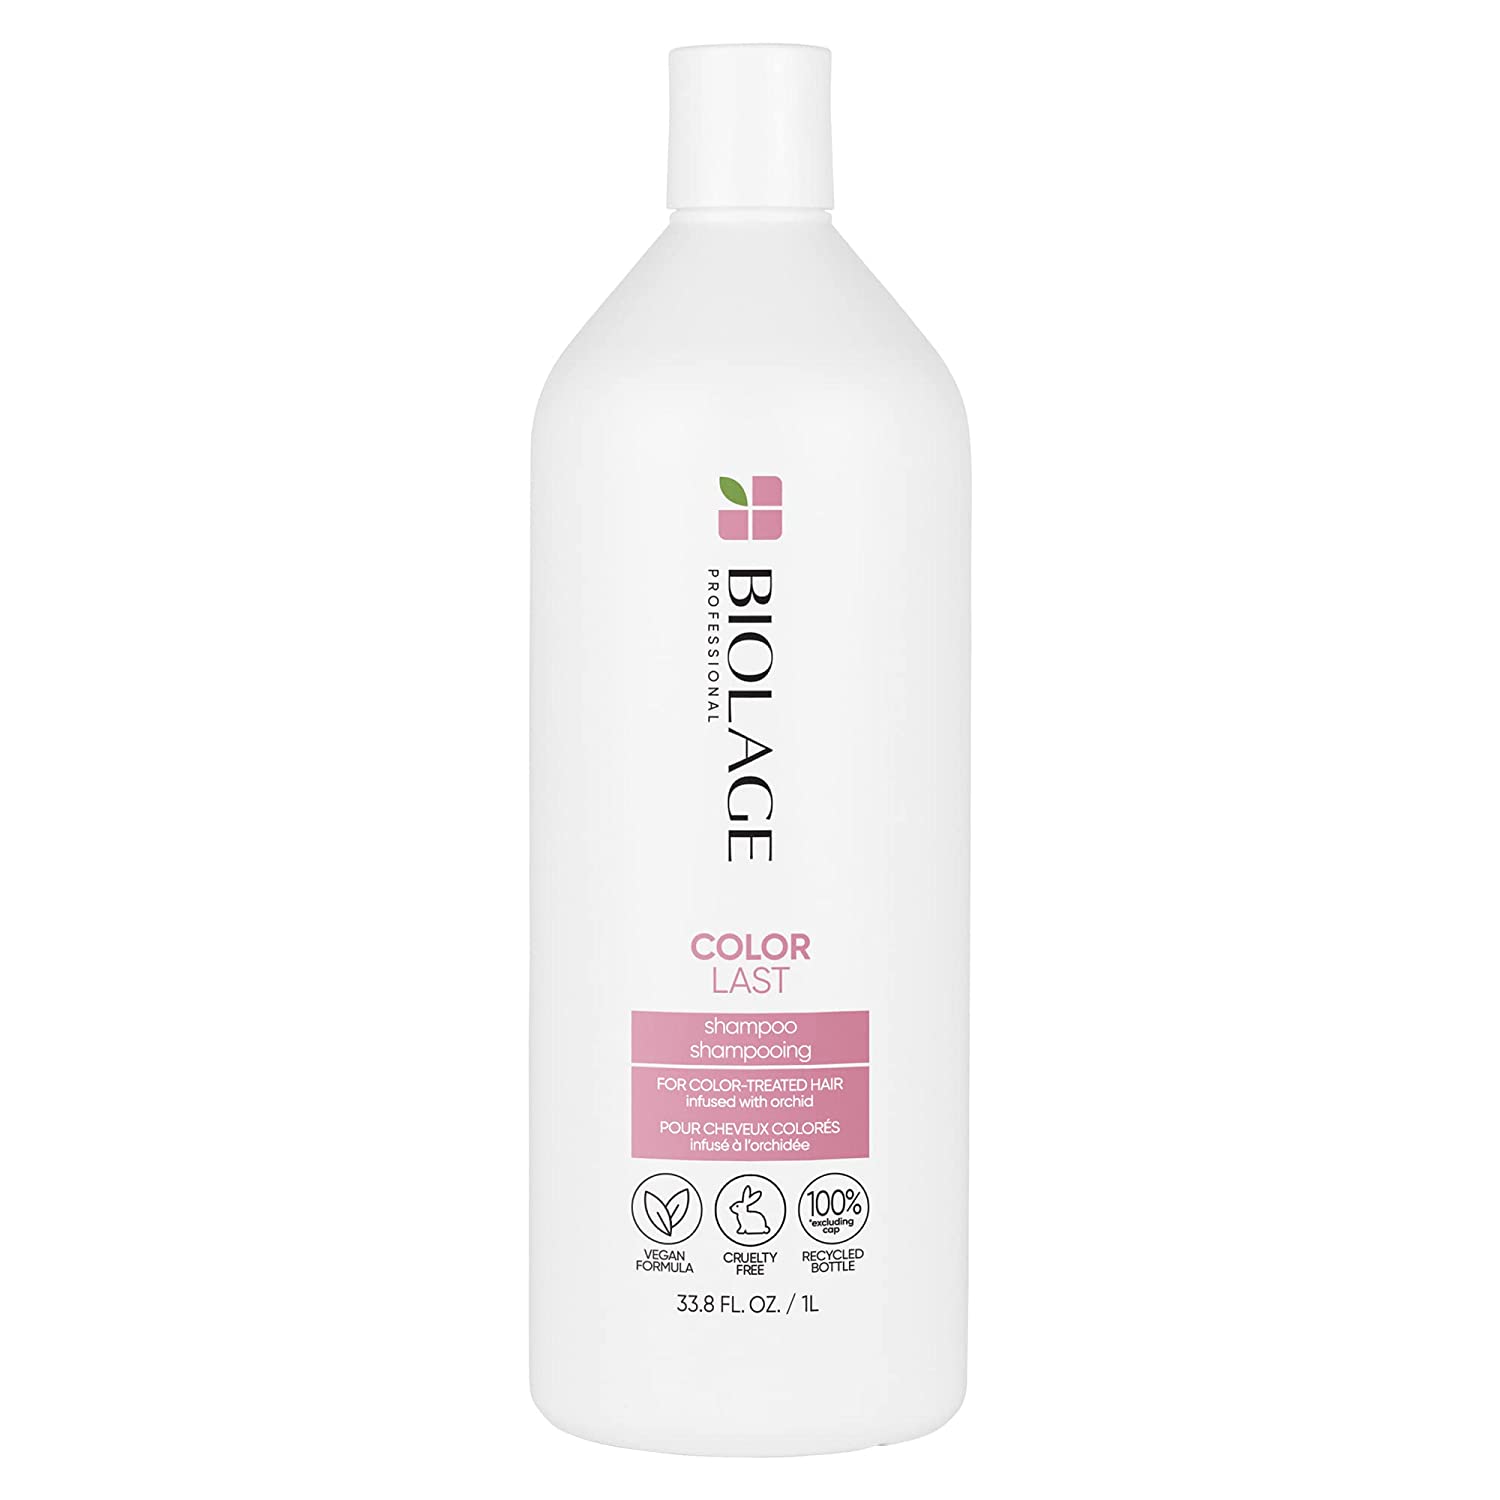 Biolage Color Last Shampoo | Helps Protect Hair & [...]